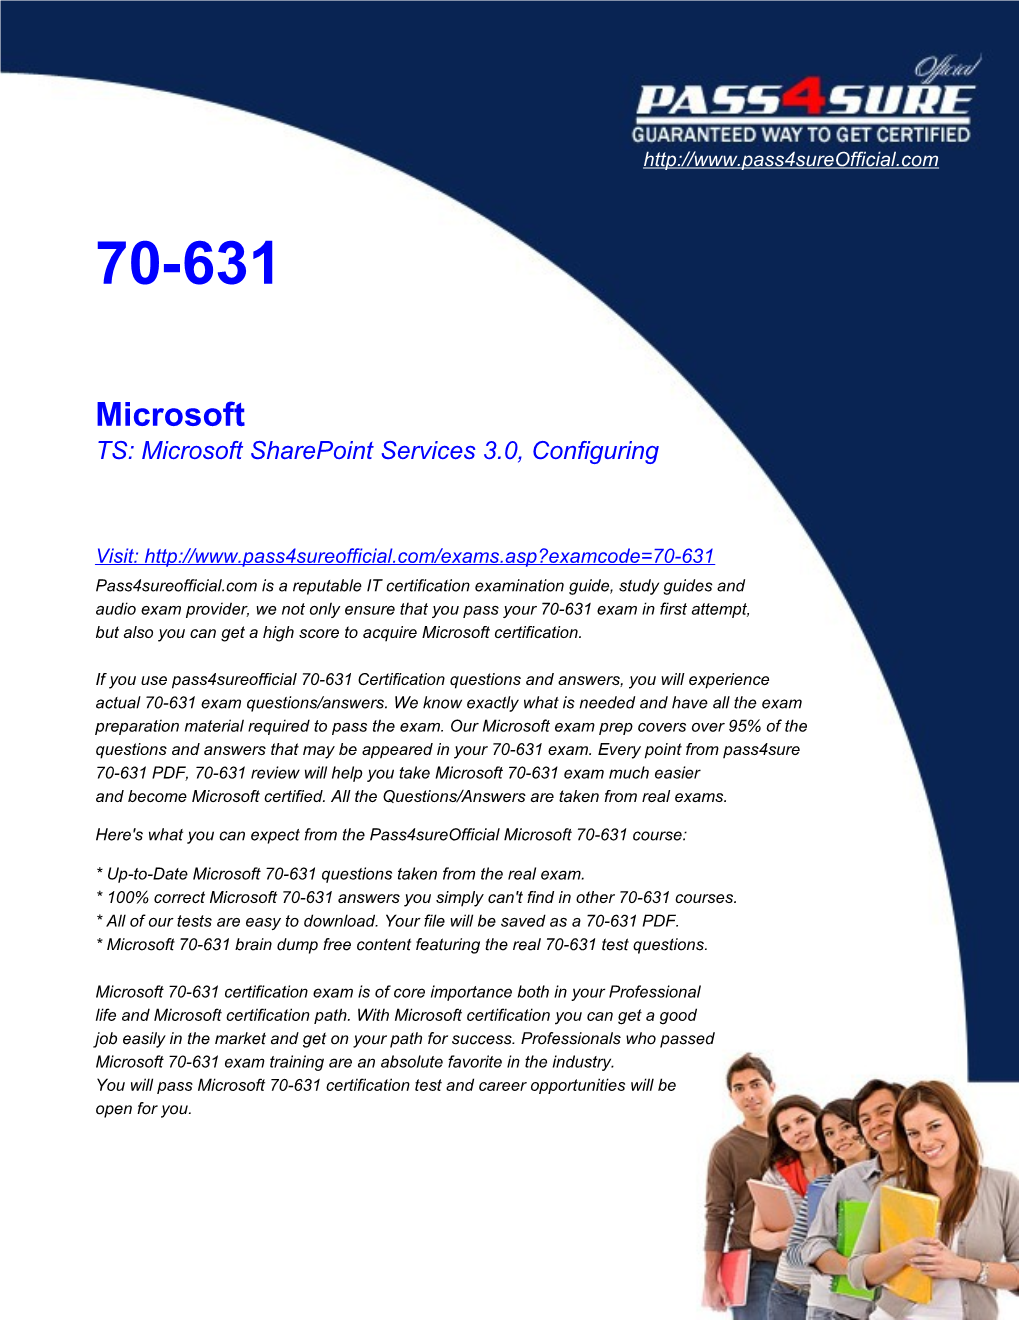 TS: Microsoft Sharepoint Services 3.0, Configuring